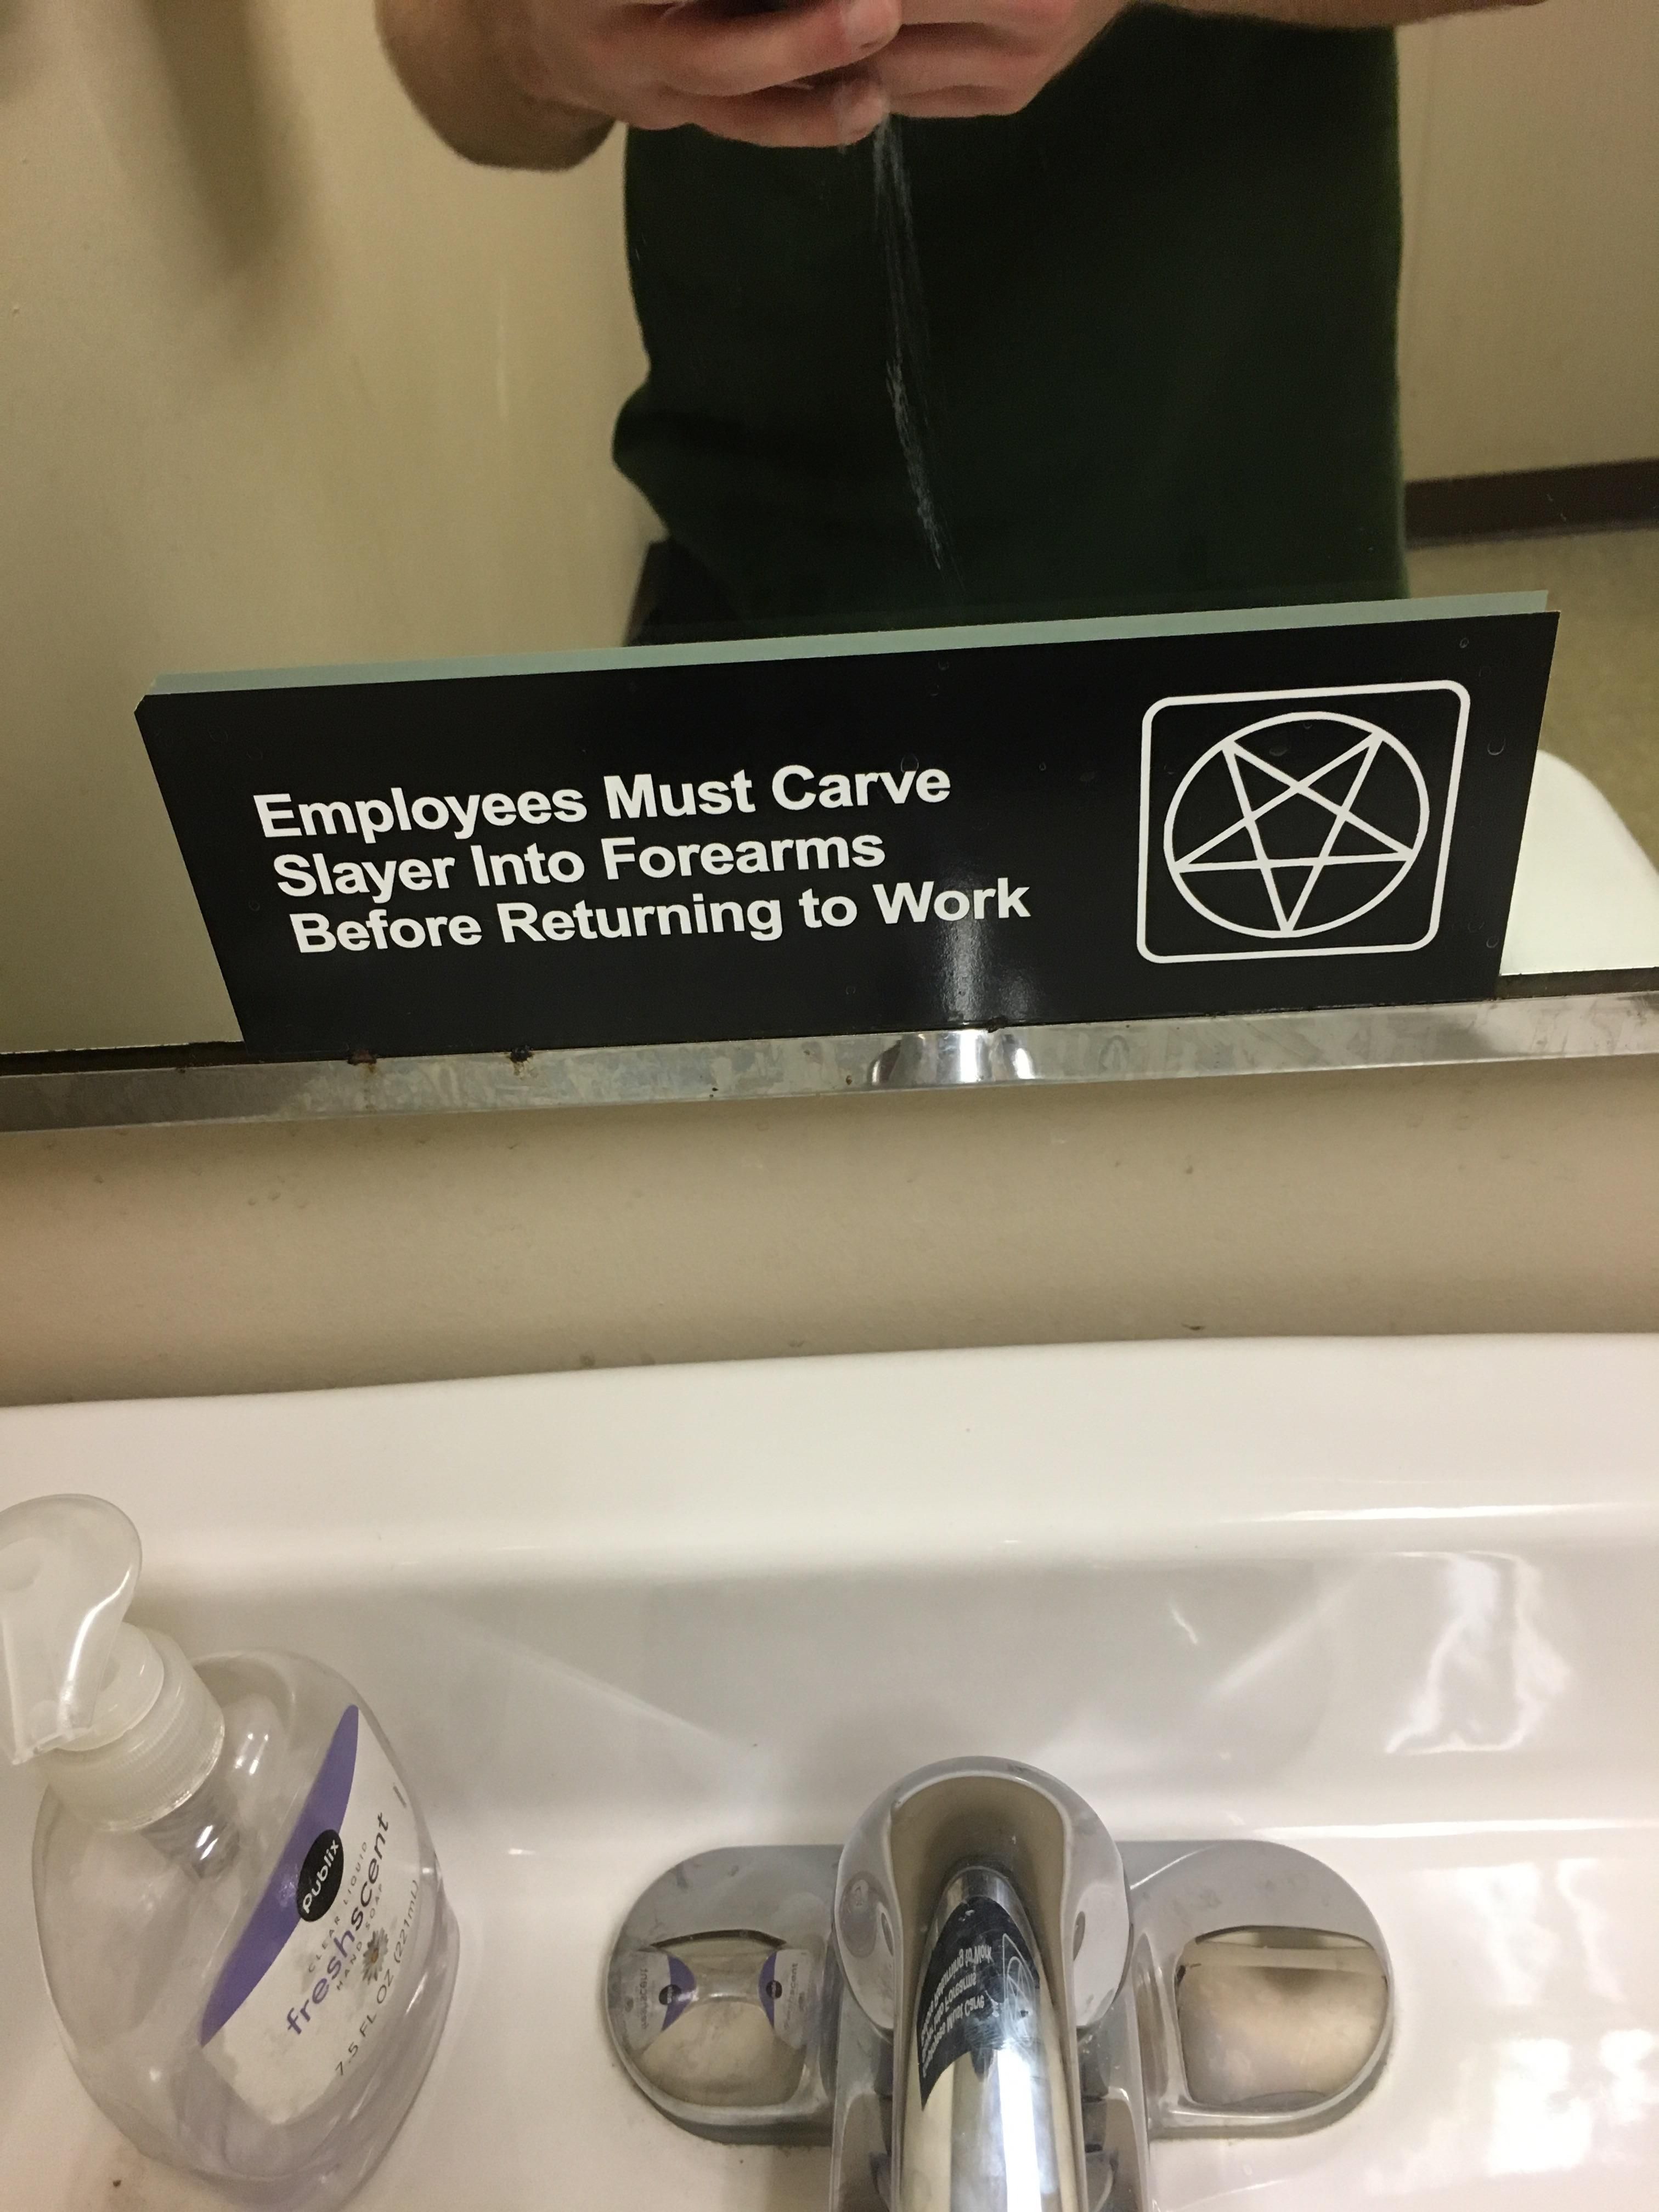 A friend of mine sent me a picture of his new job's bathroom...